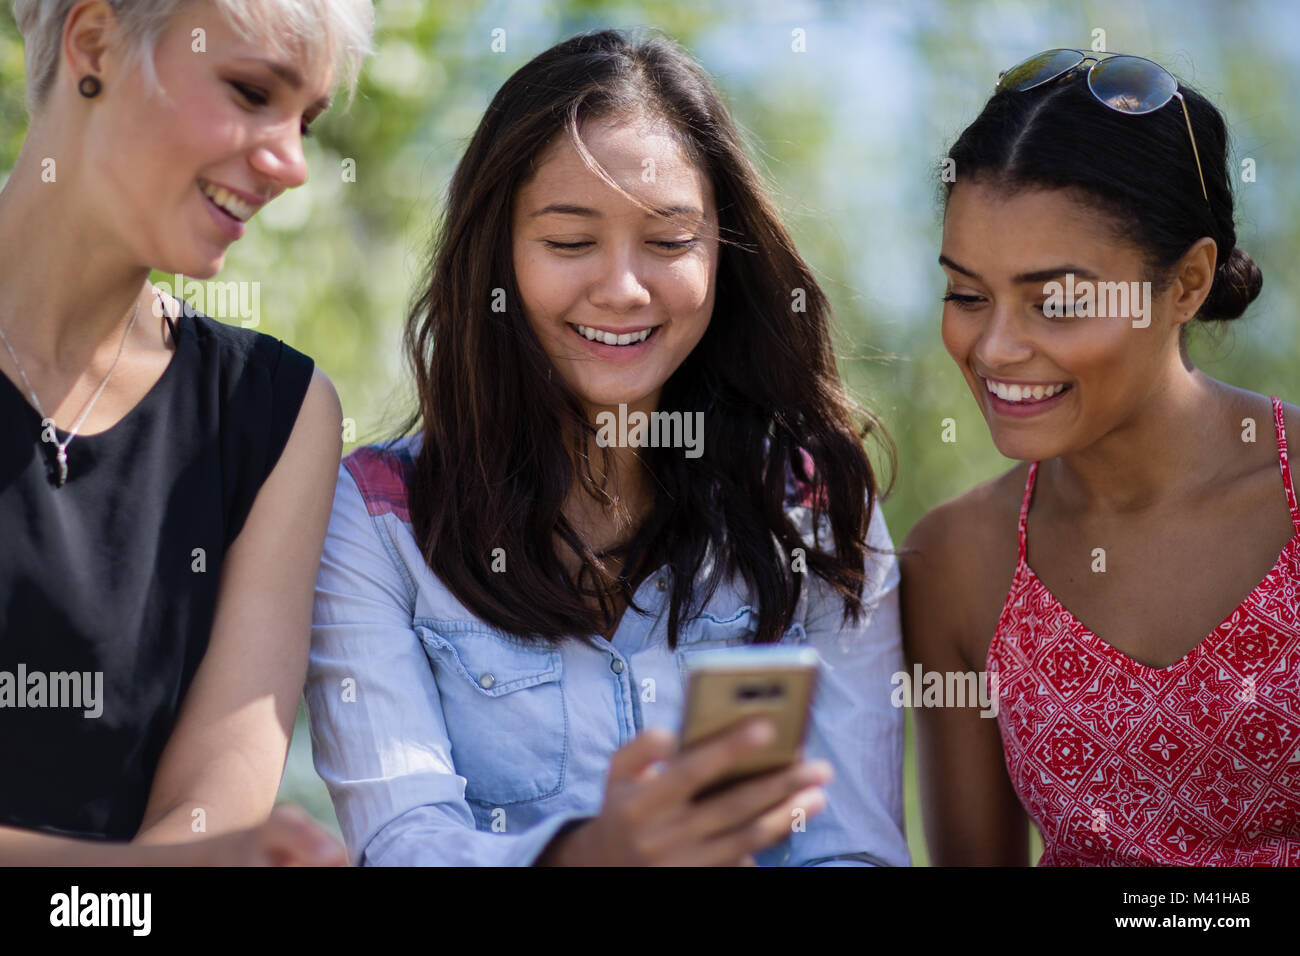 Female friends looking at smartphone Stock Photo